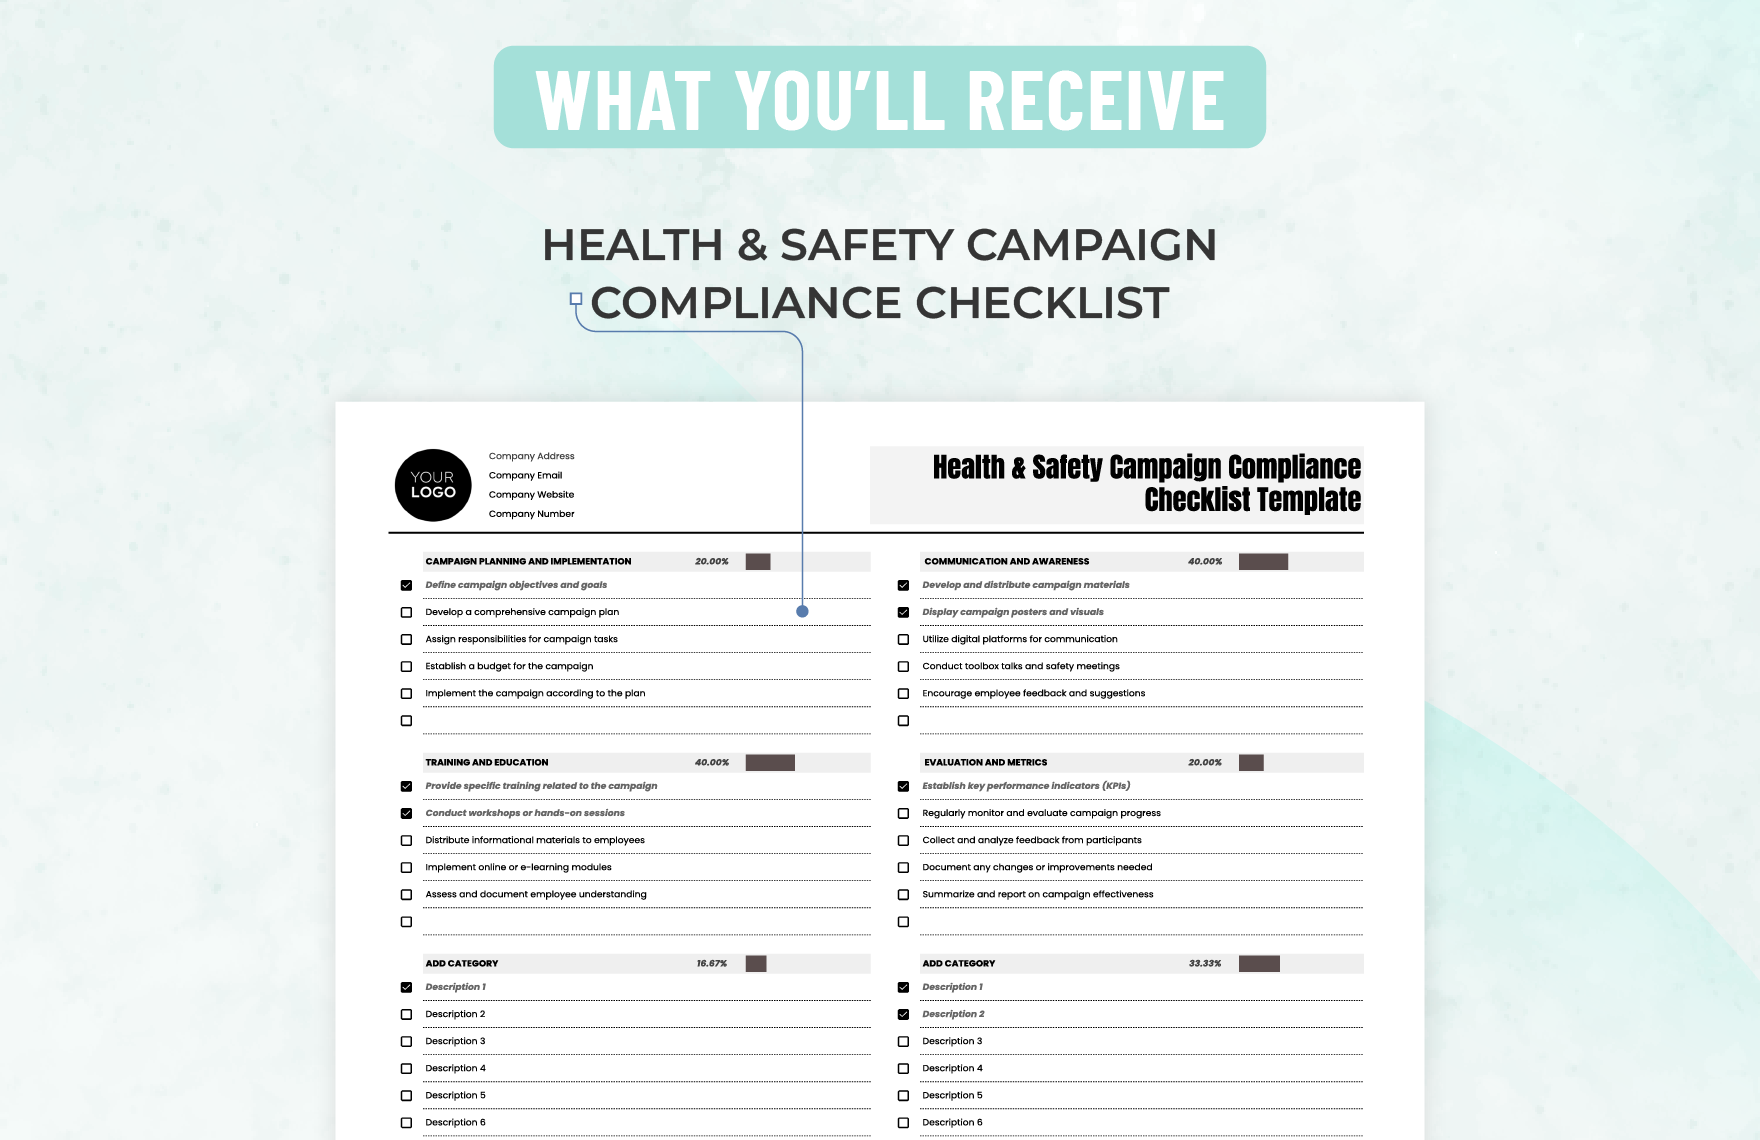 Health & Safety Campaign Compliance Checklist Template